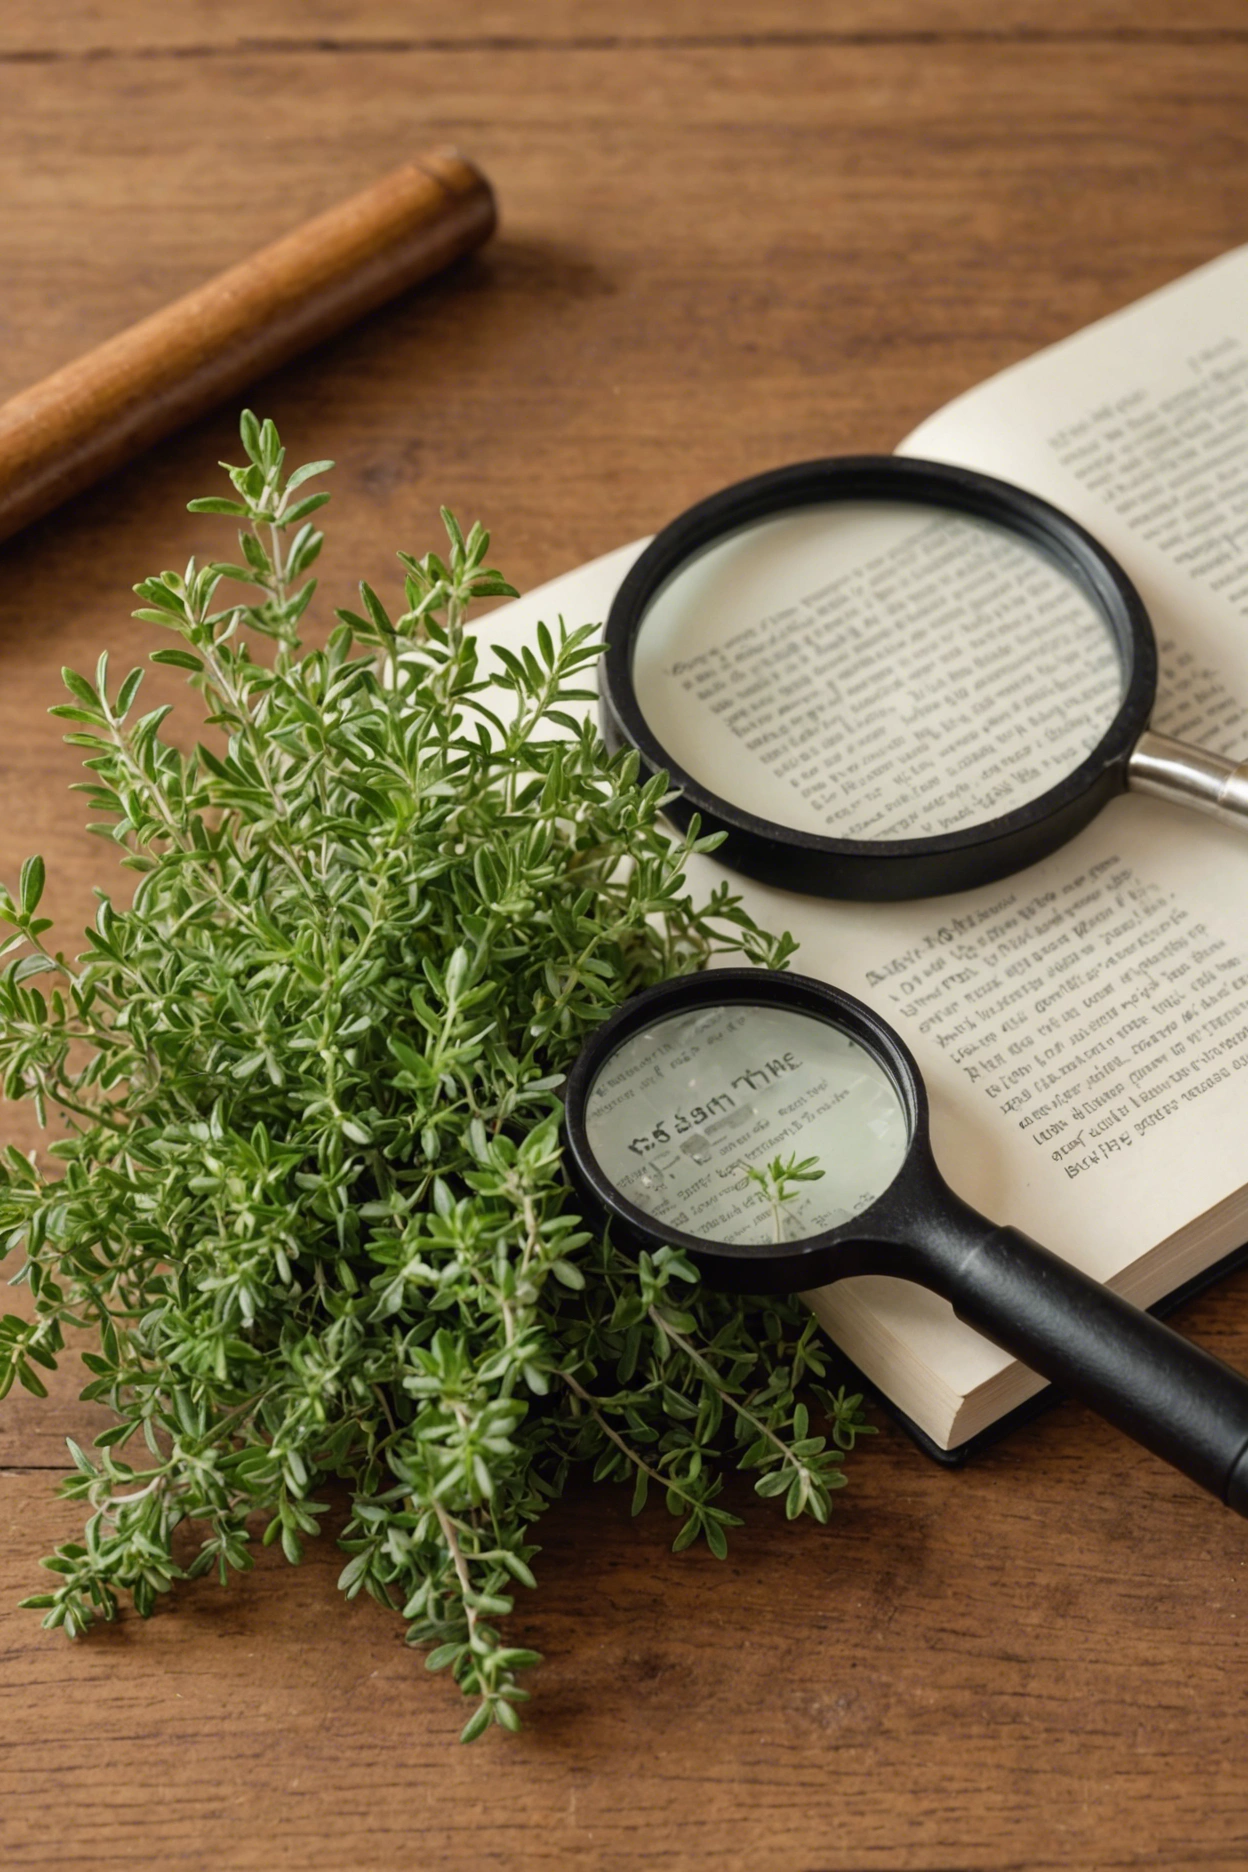 "Close-up of a thyme plant with yellowing leaves under a magnifying glass, surrounded by gardening tools and an open guidebook on thyme diseases."